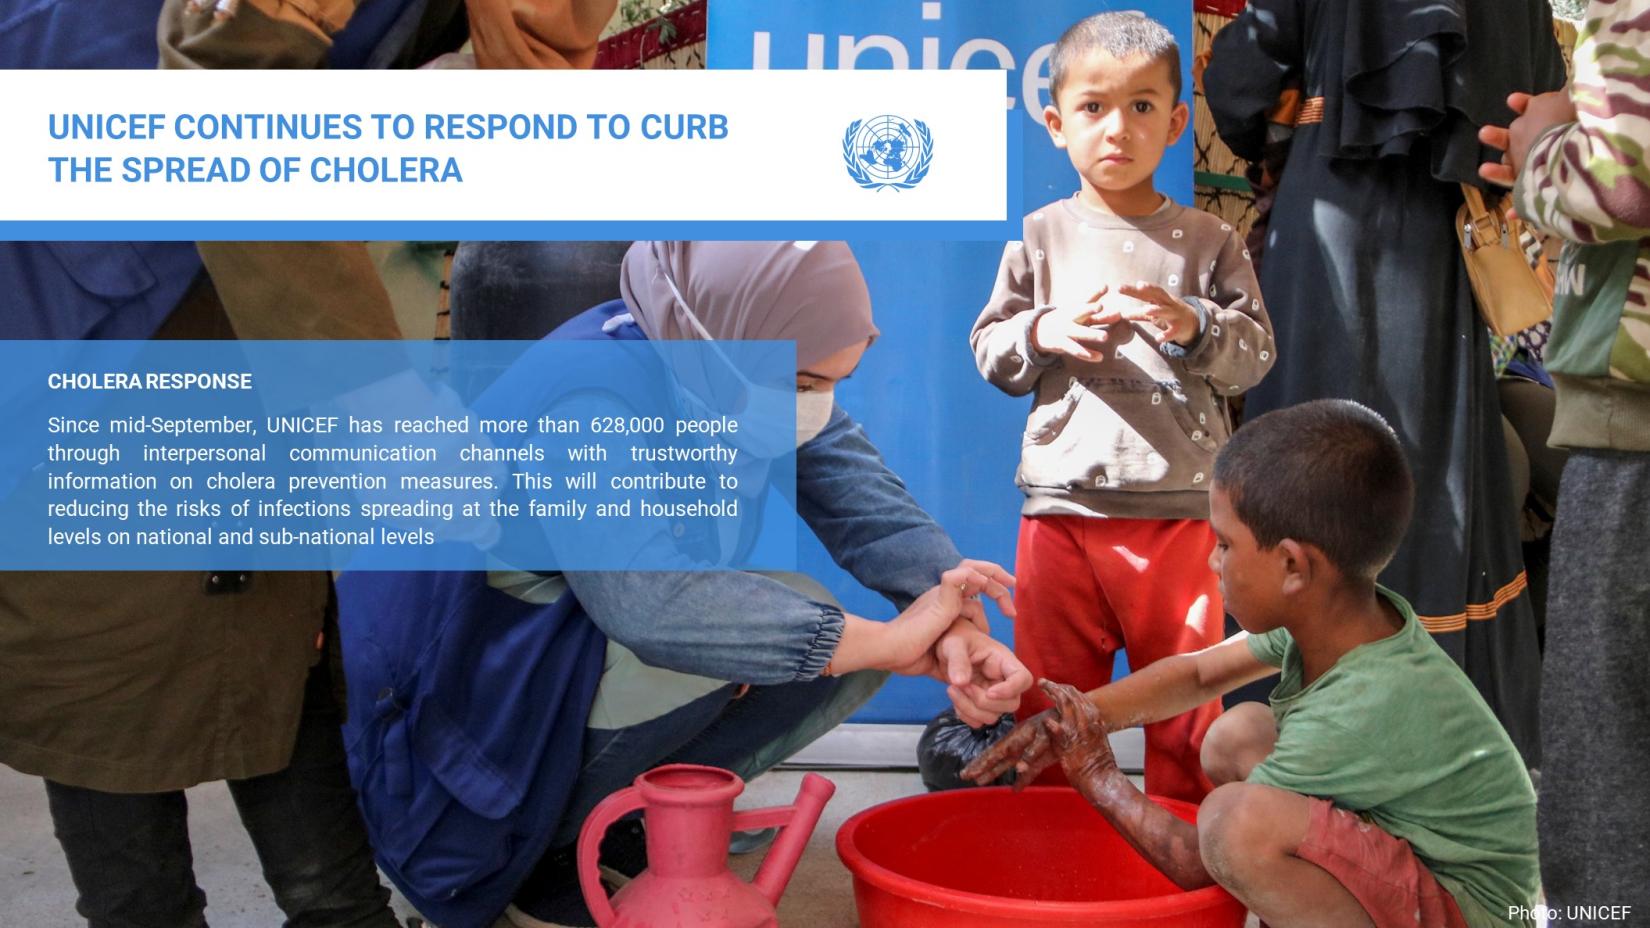 UNICEF CONTINUES TO RESPOND TO CURB THE SPREAD OF CHOLERA